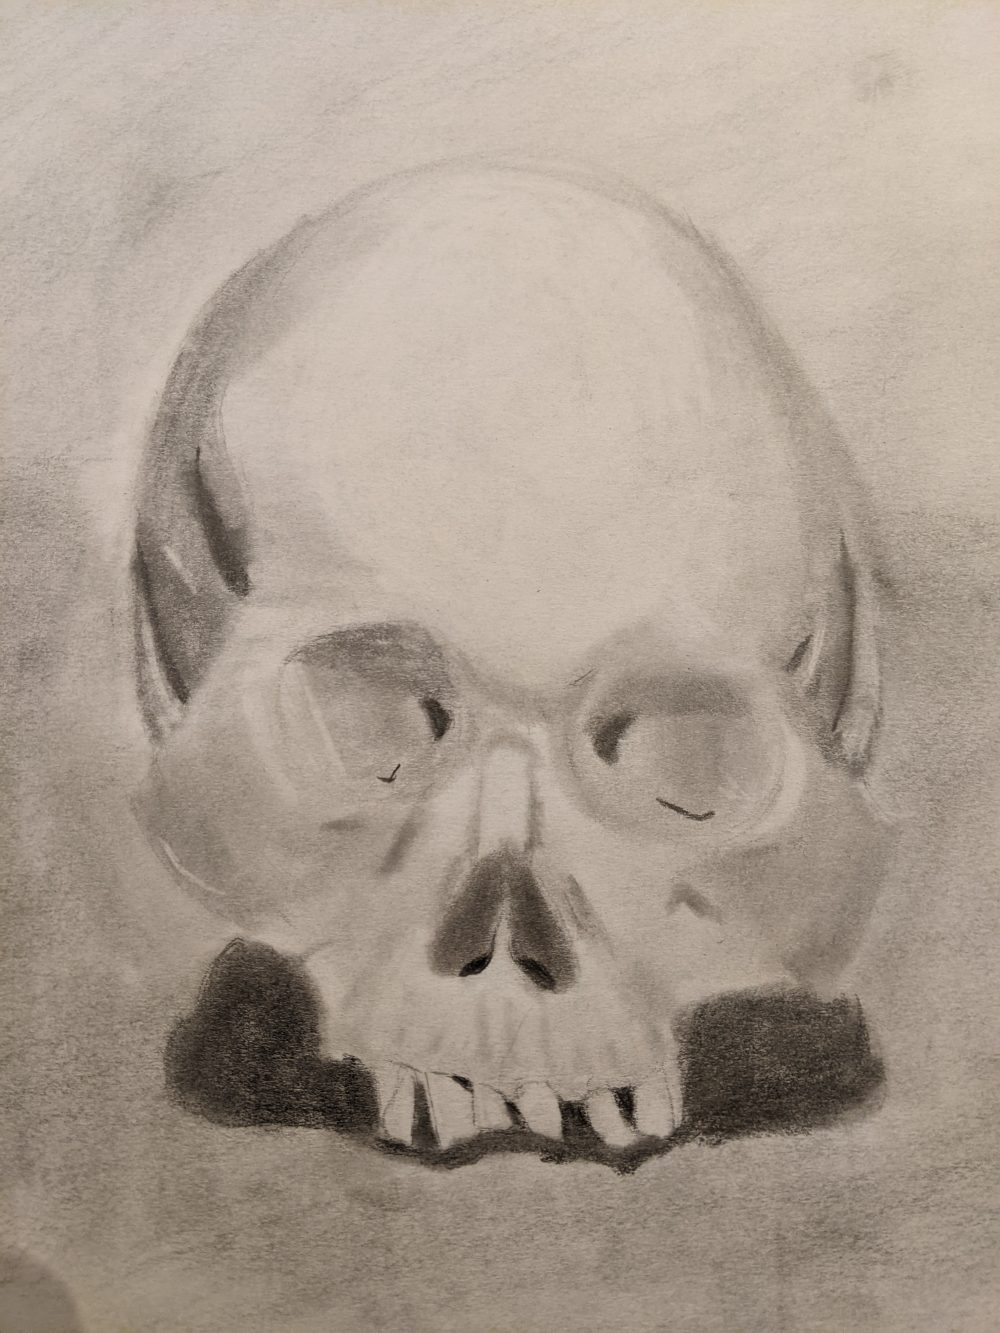 A greyscale drawing of a skull that has seen some better days.